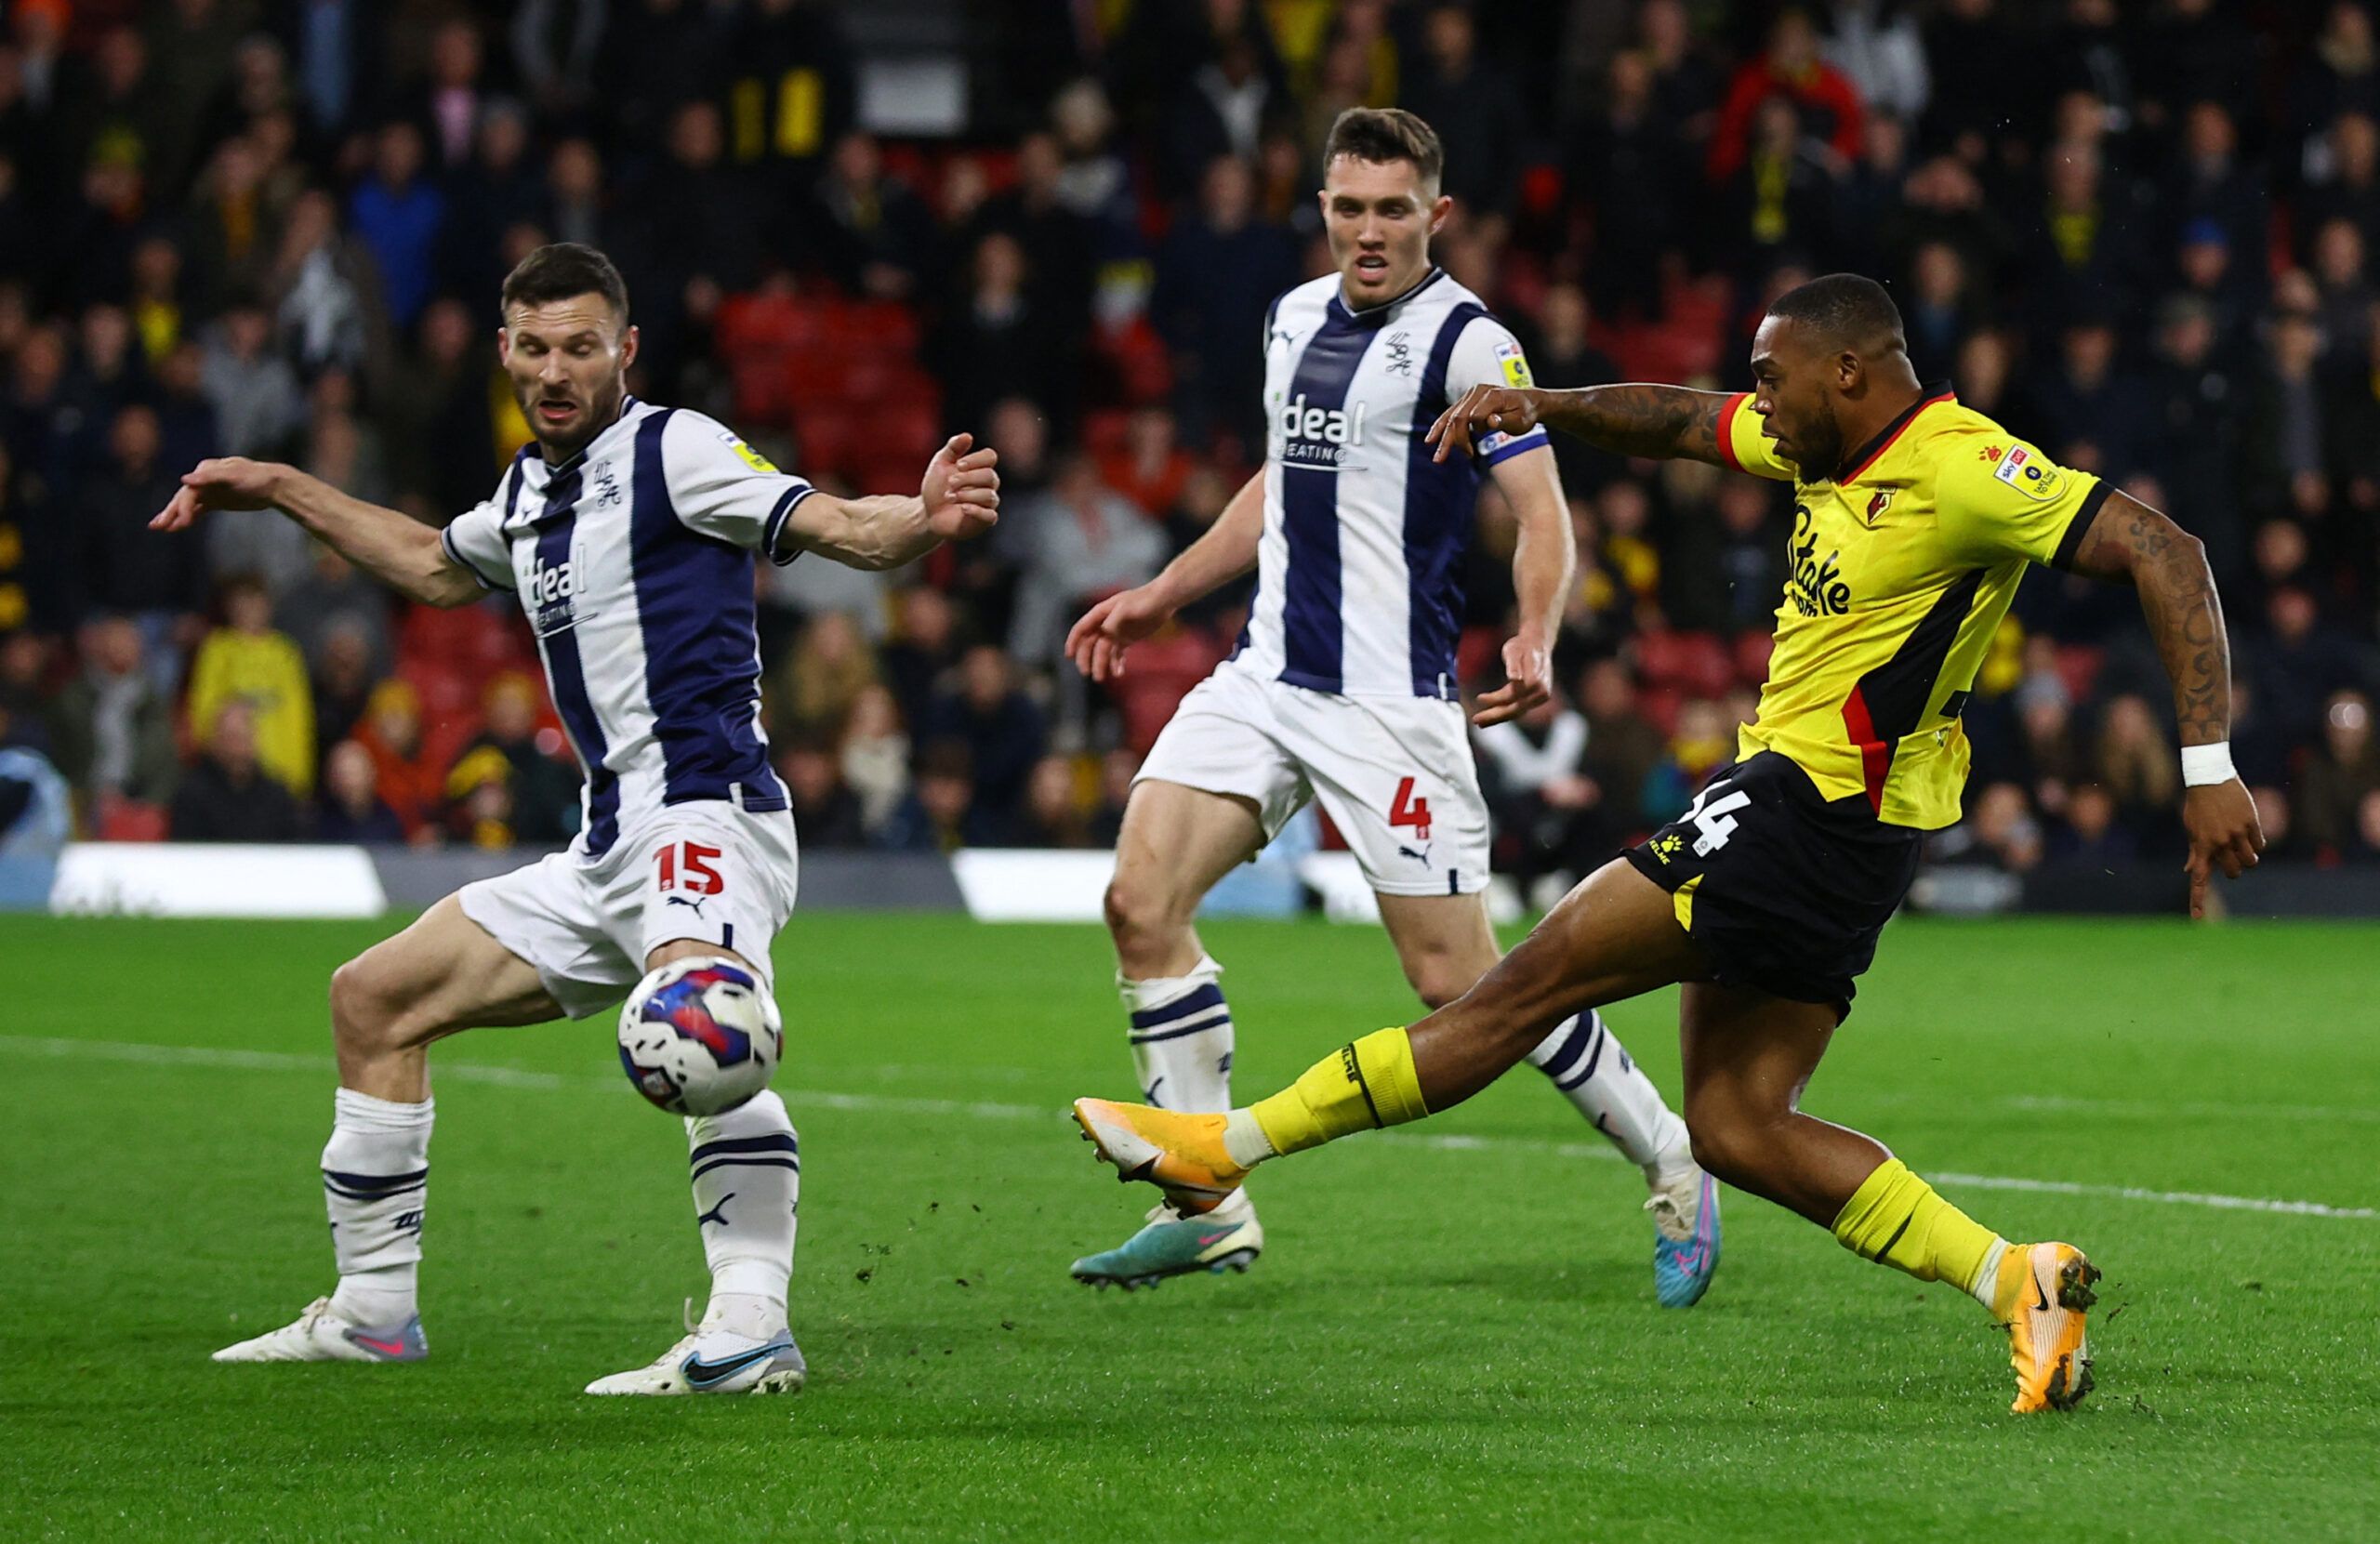 Soccer Football - Championship - Watford v West Bromwich Albion - Vicarage Road, Watford, Britain - February 20, 2023 Watford's Hassane Kamara shoots past West Bromwich Albion's Erik Pieters Action Images/Matthew Childs EDITORIAL USE ONLY. No use with unauthorized audio, video, data, fixture lists, club/league logos or 'live' services. Online in-match use limited to 75 images, no video emulation. No use in betting, games or single club /league/player publications.  Please contact your account re